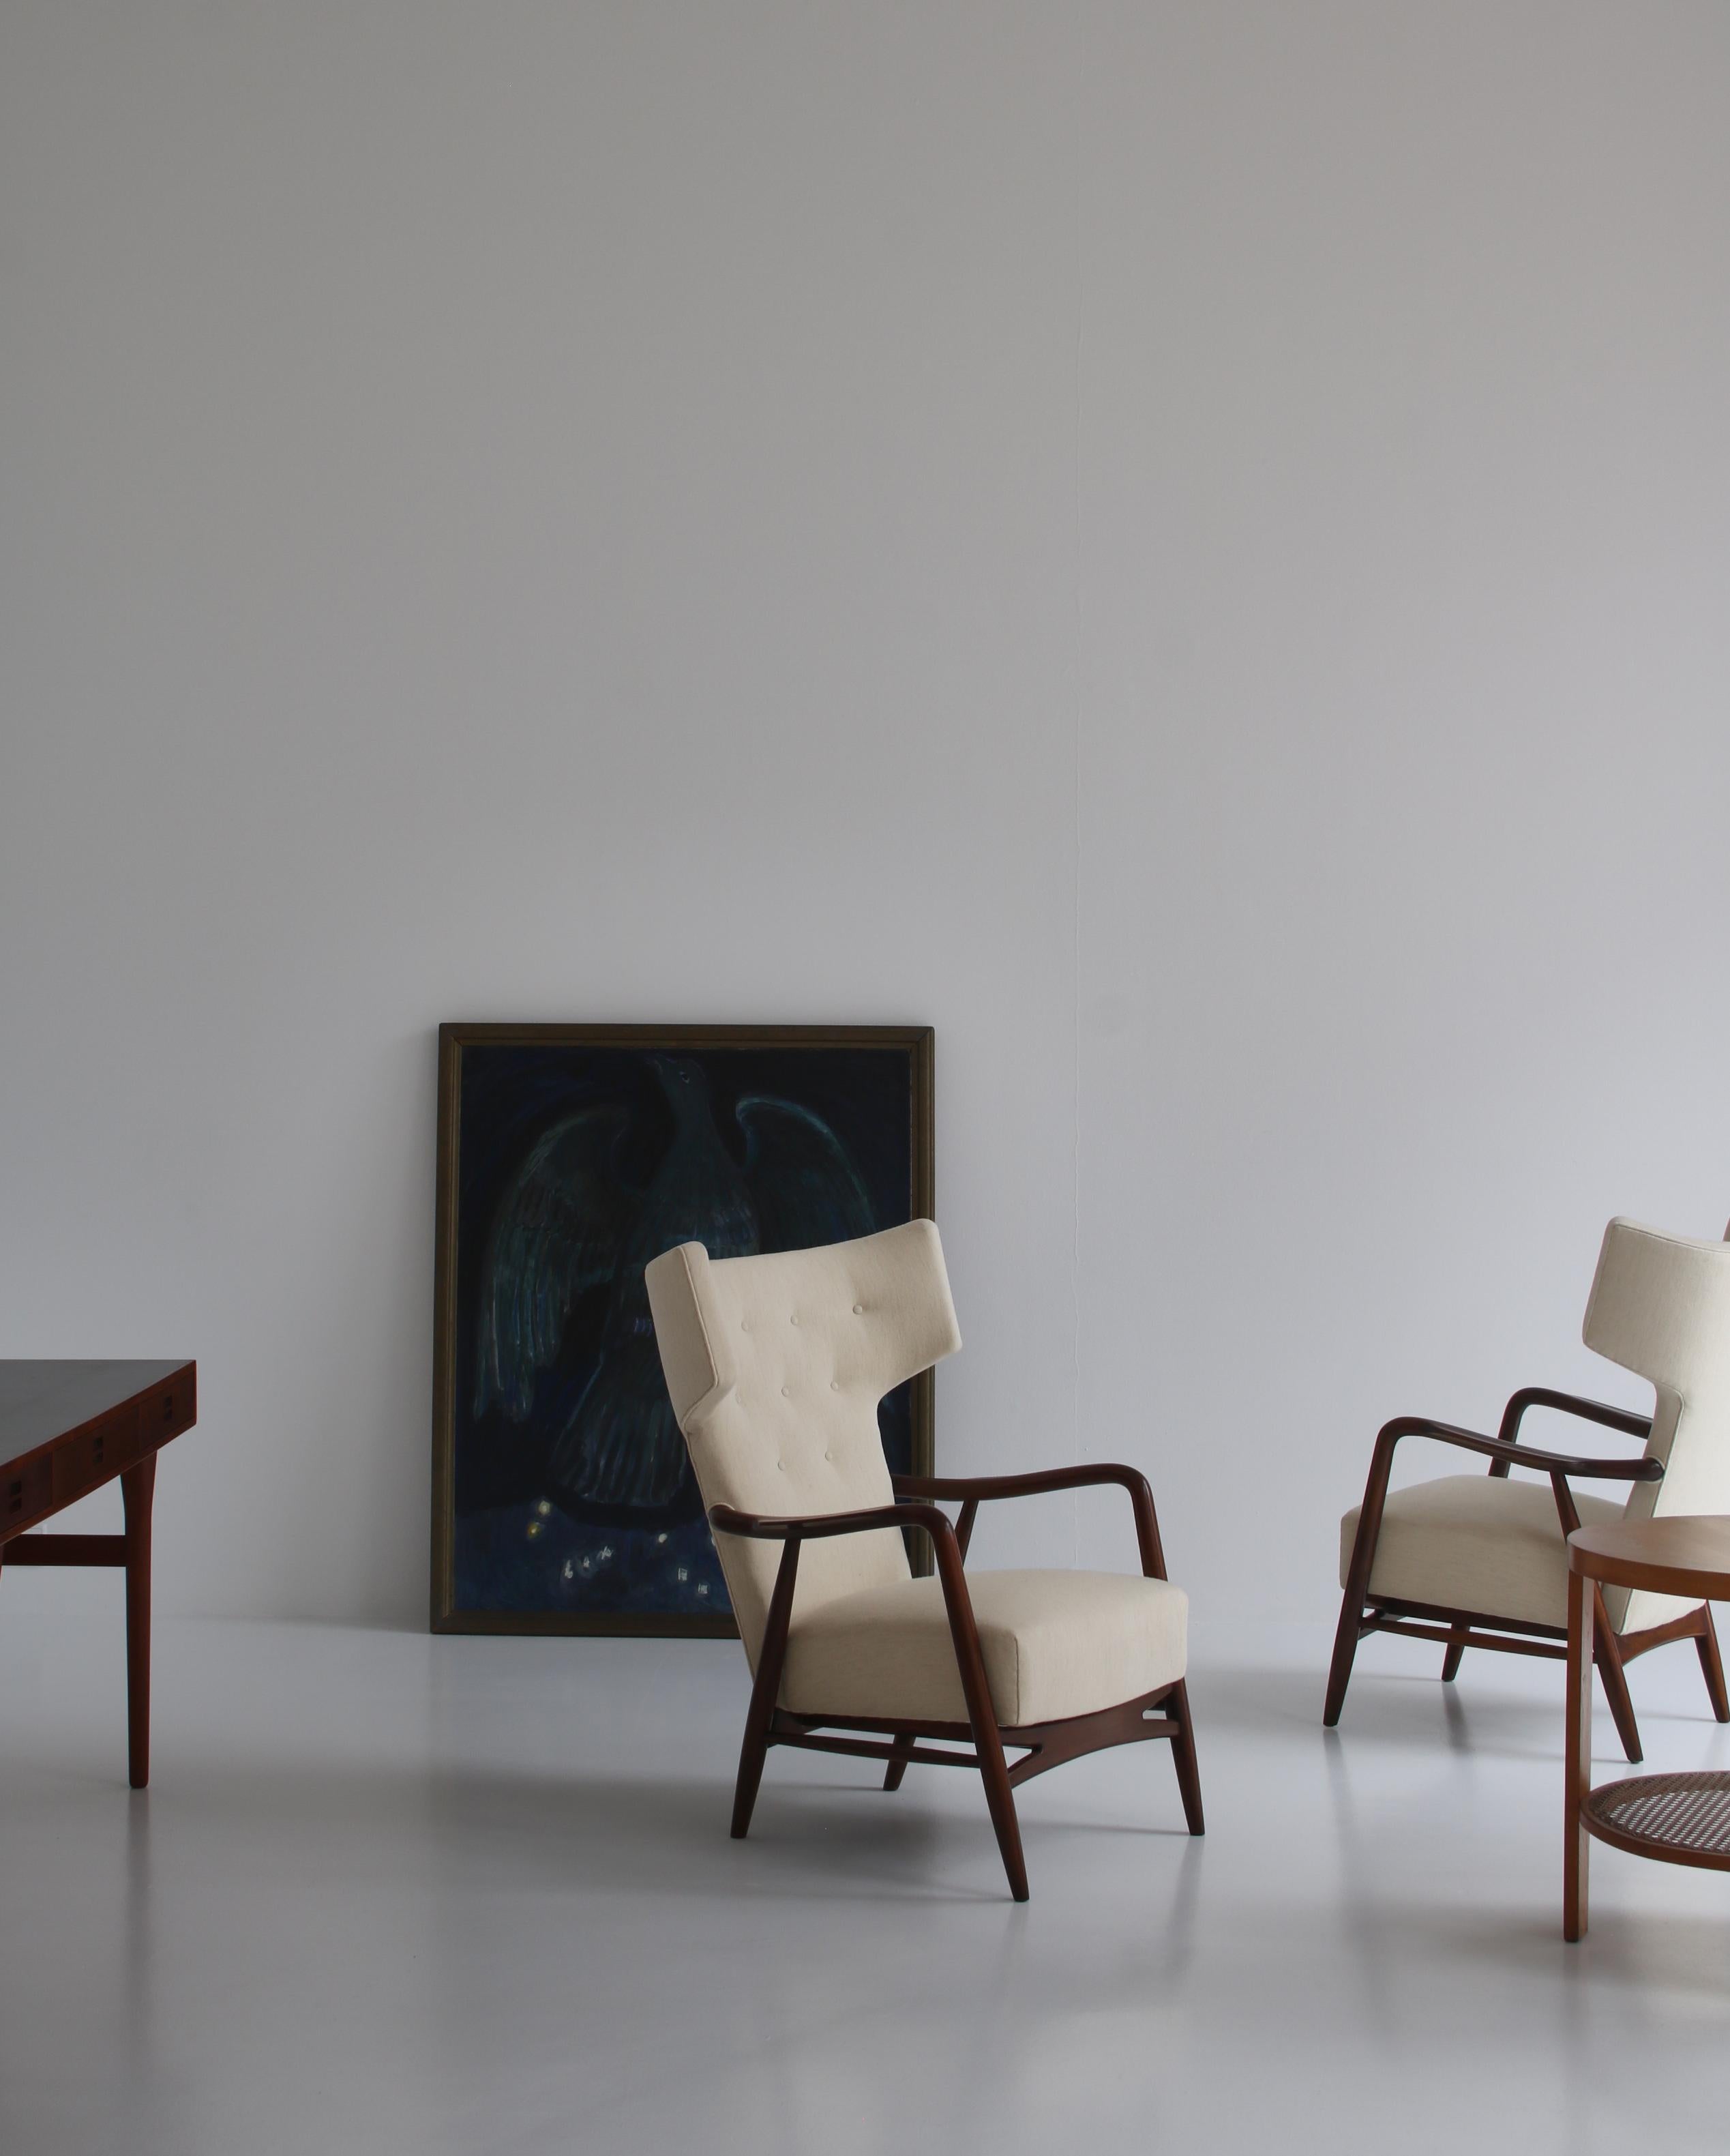 Important and rare pair of wingback armchairs designed by Eva Koppel in 1947 and manufactured at Slagelse Møbelværk, Denmark. Made from dark stained beech and upholstered in White 